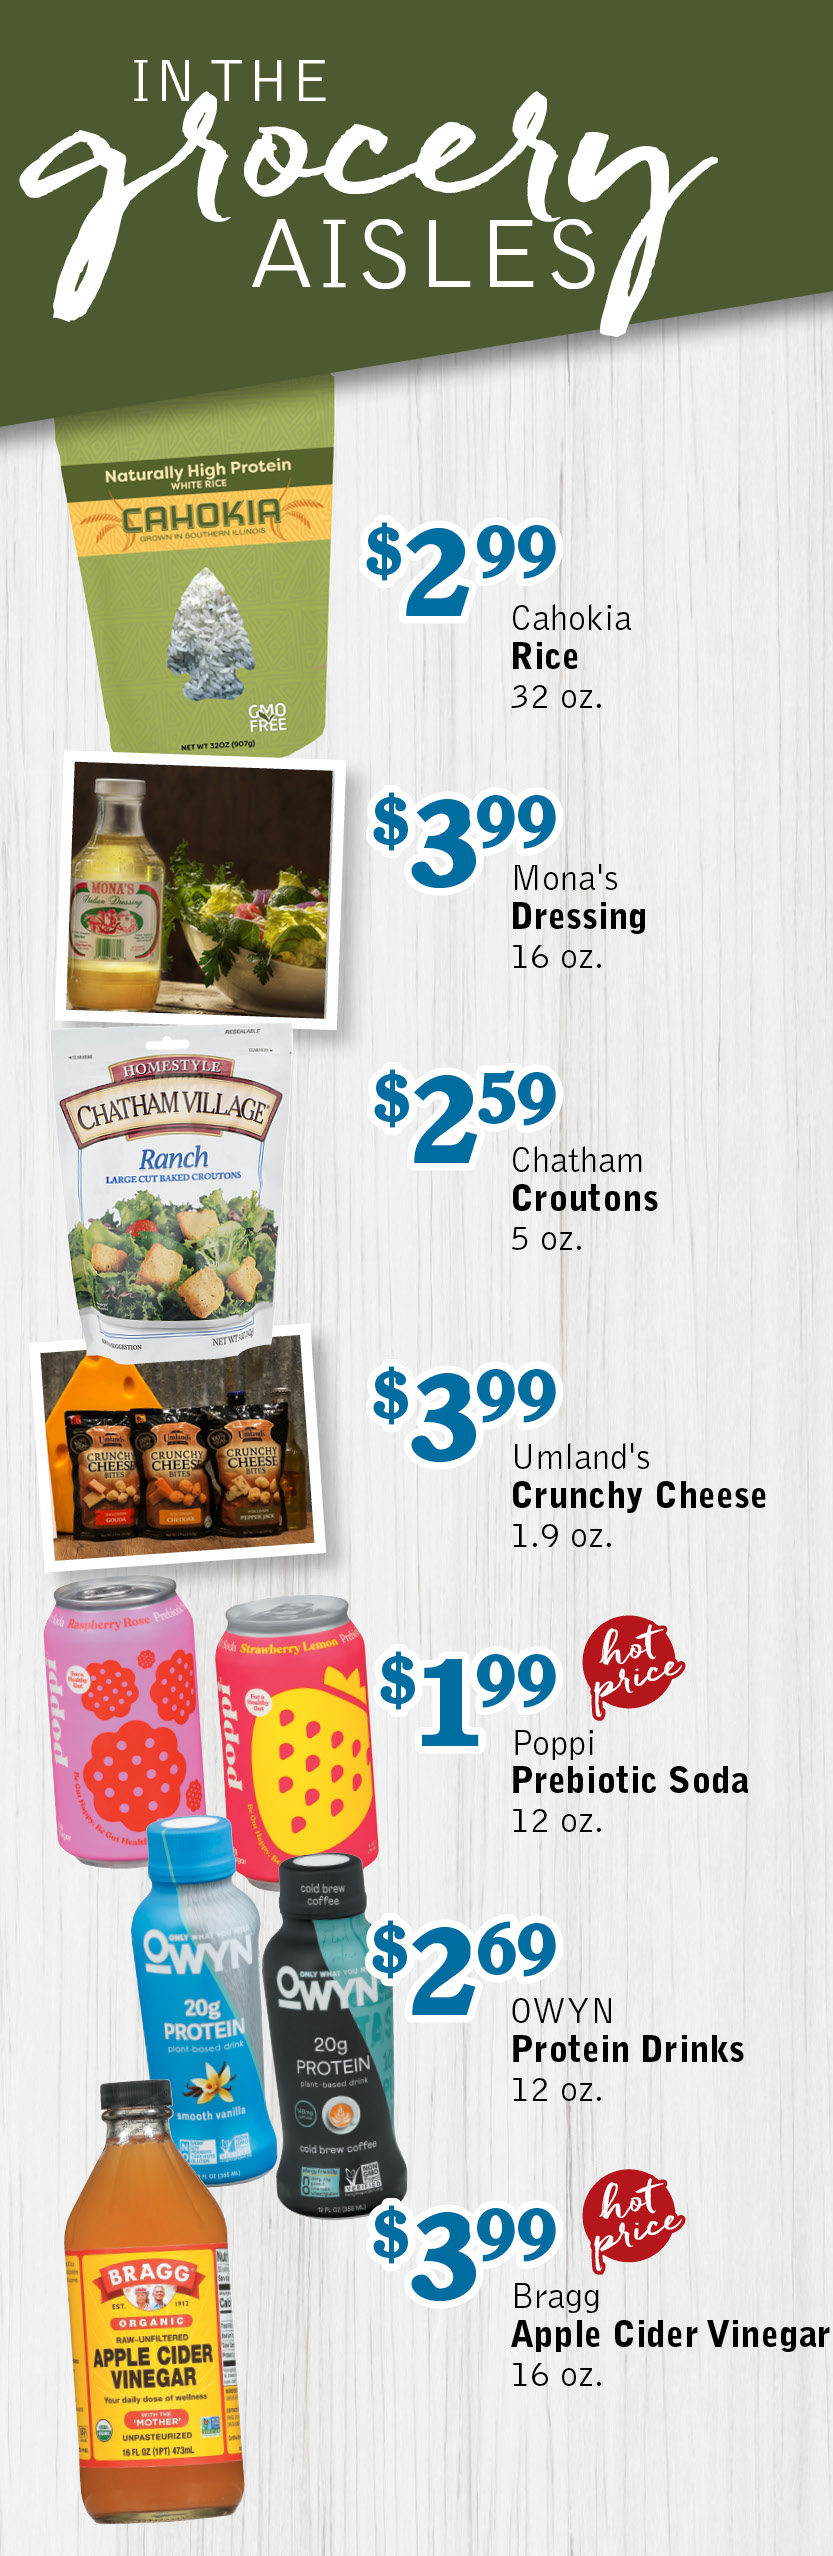 Grocery Aisles Weekly Specials